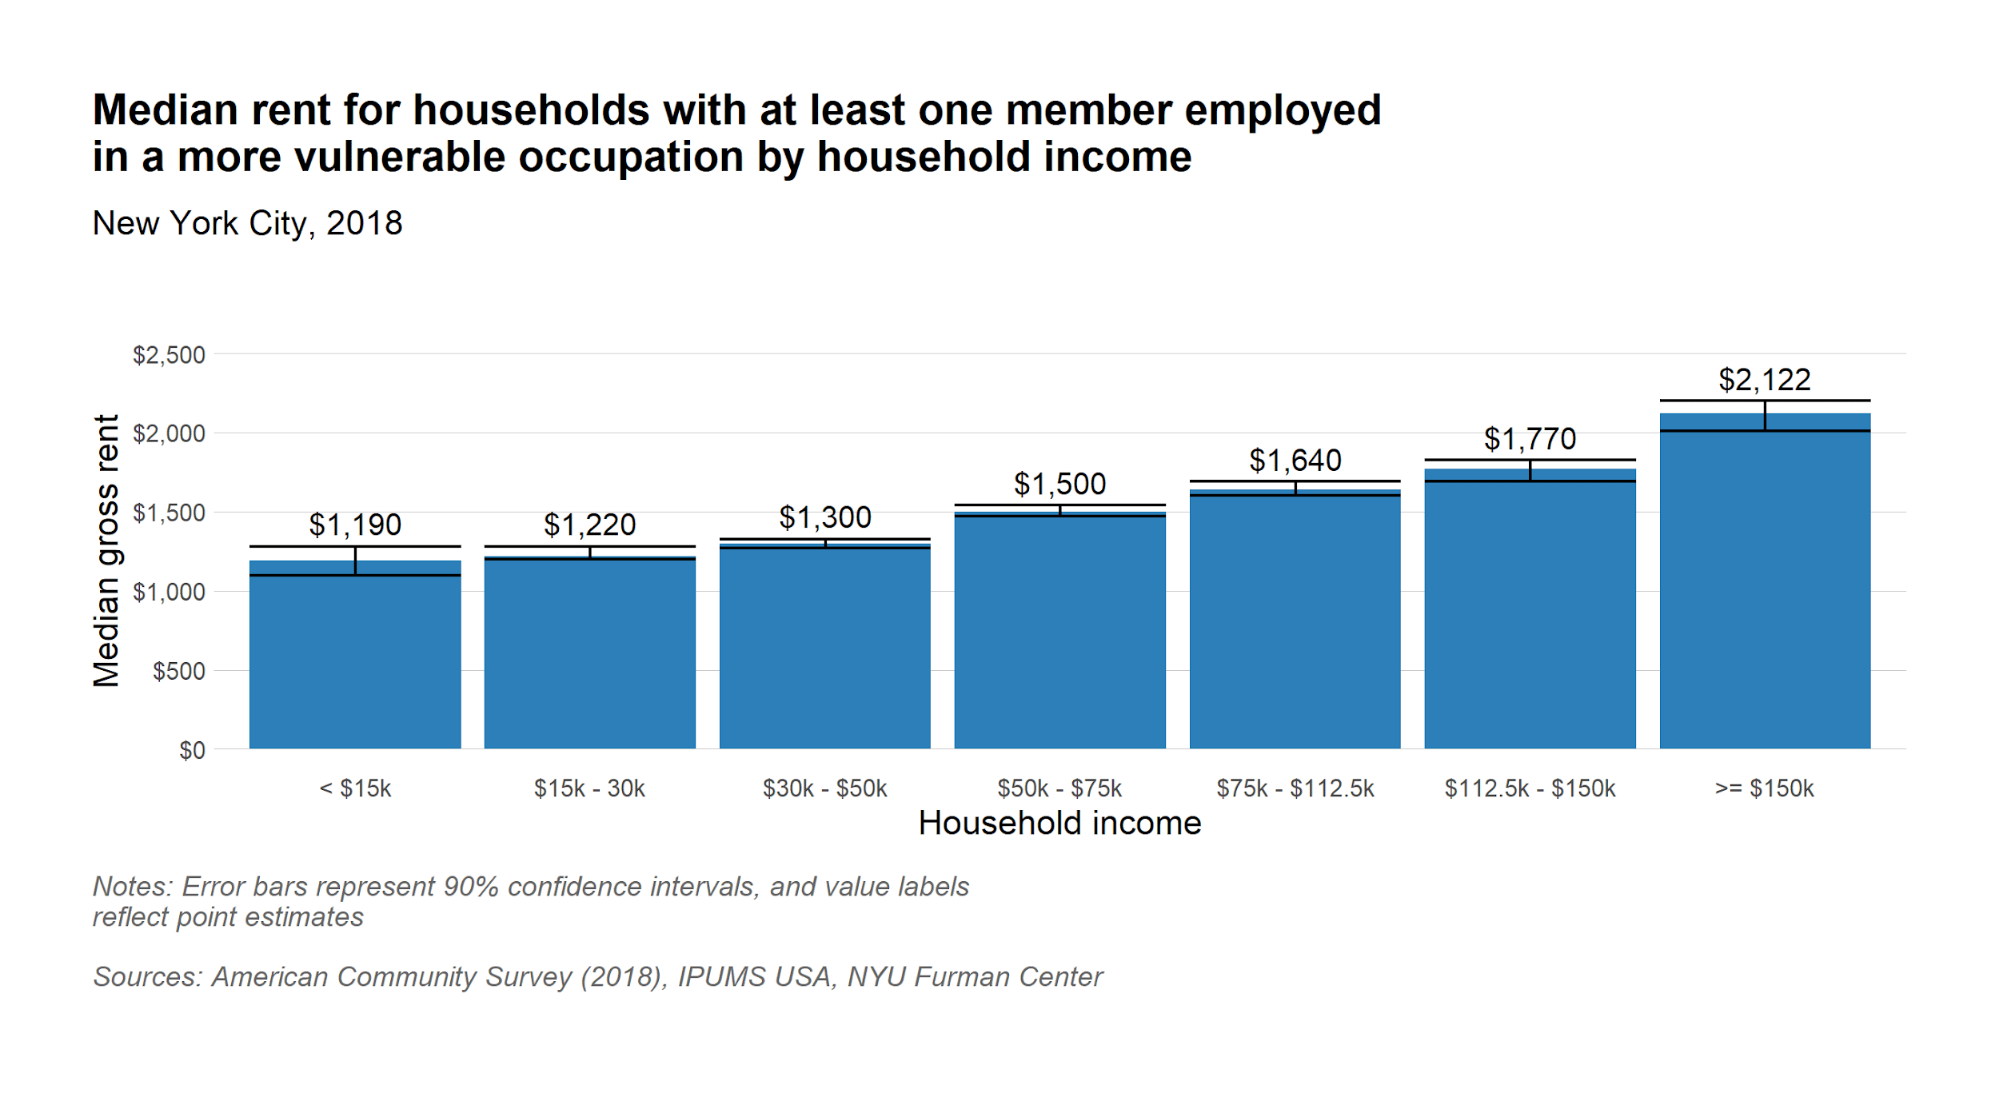 Median rent for households with at least one member in a vulnerable occupation